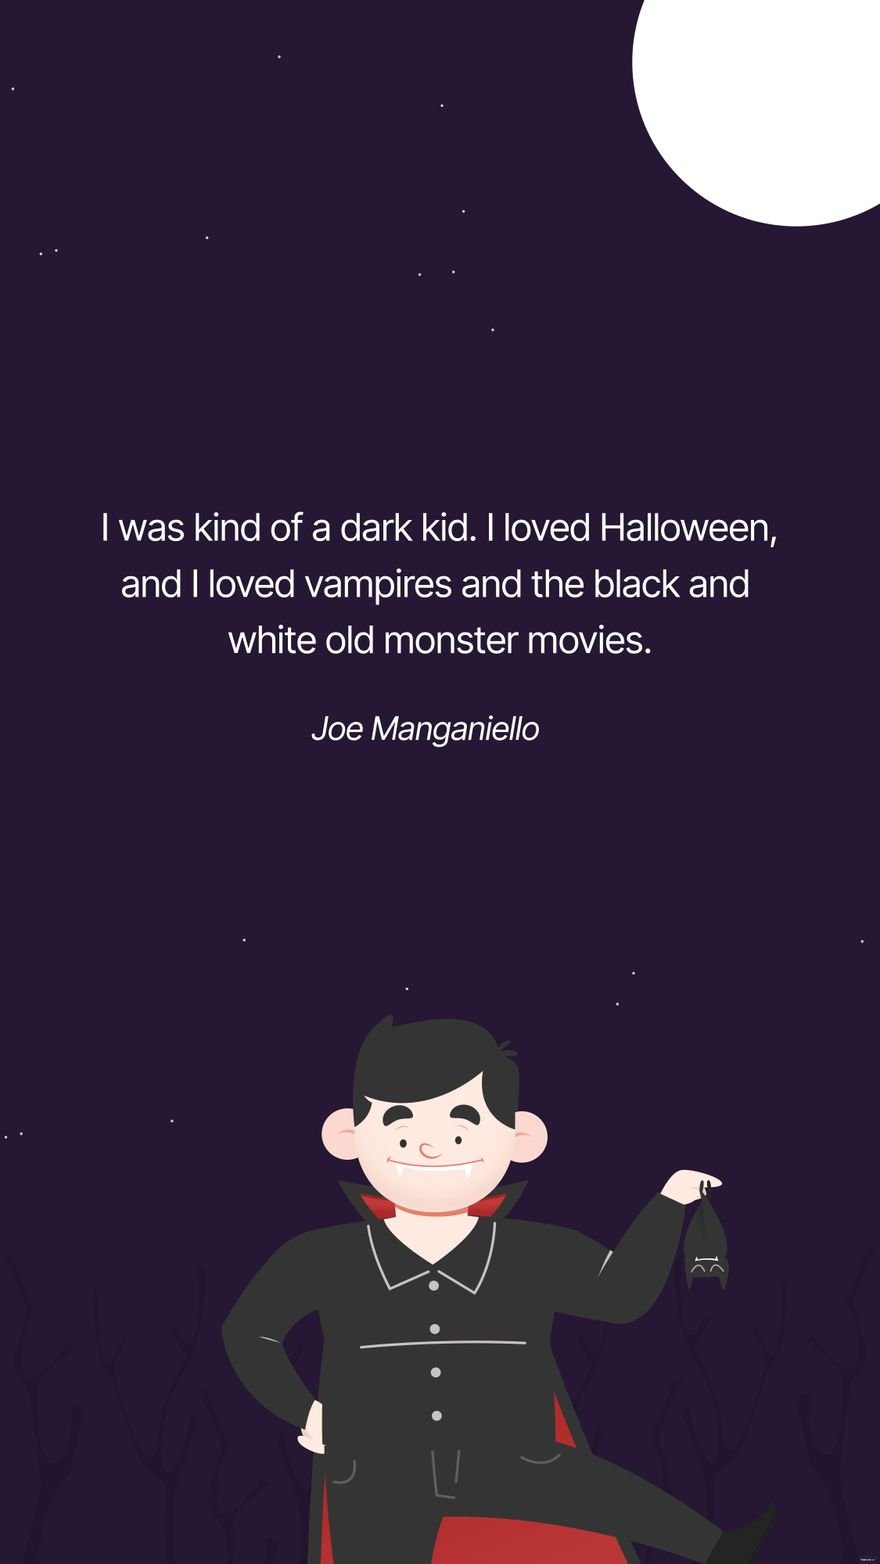 Joe Manganiello- I was kind of a dark kid. I loved Halloween, and I loved vampires and the black and white old monster movies.